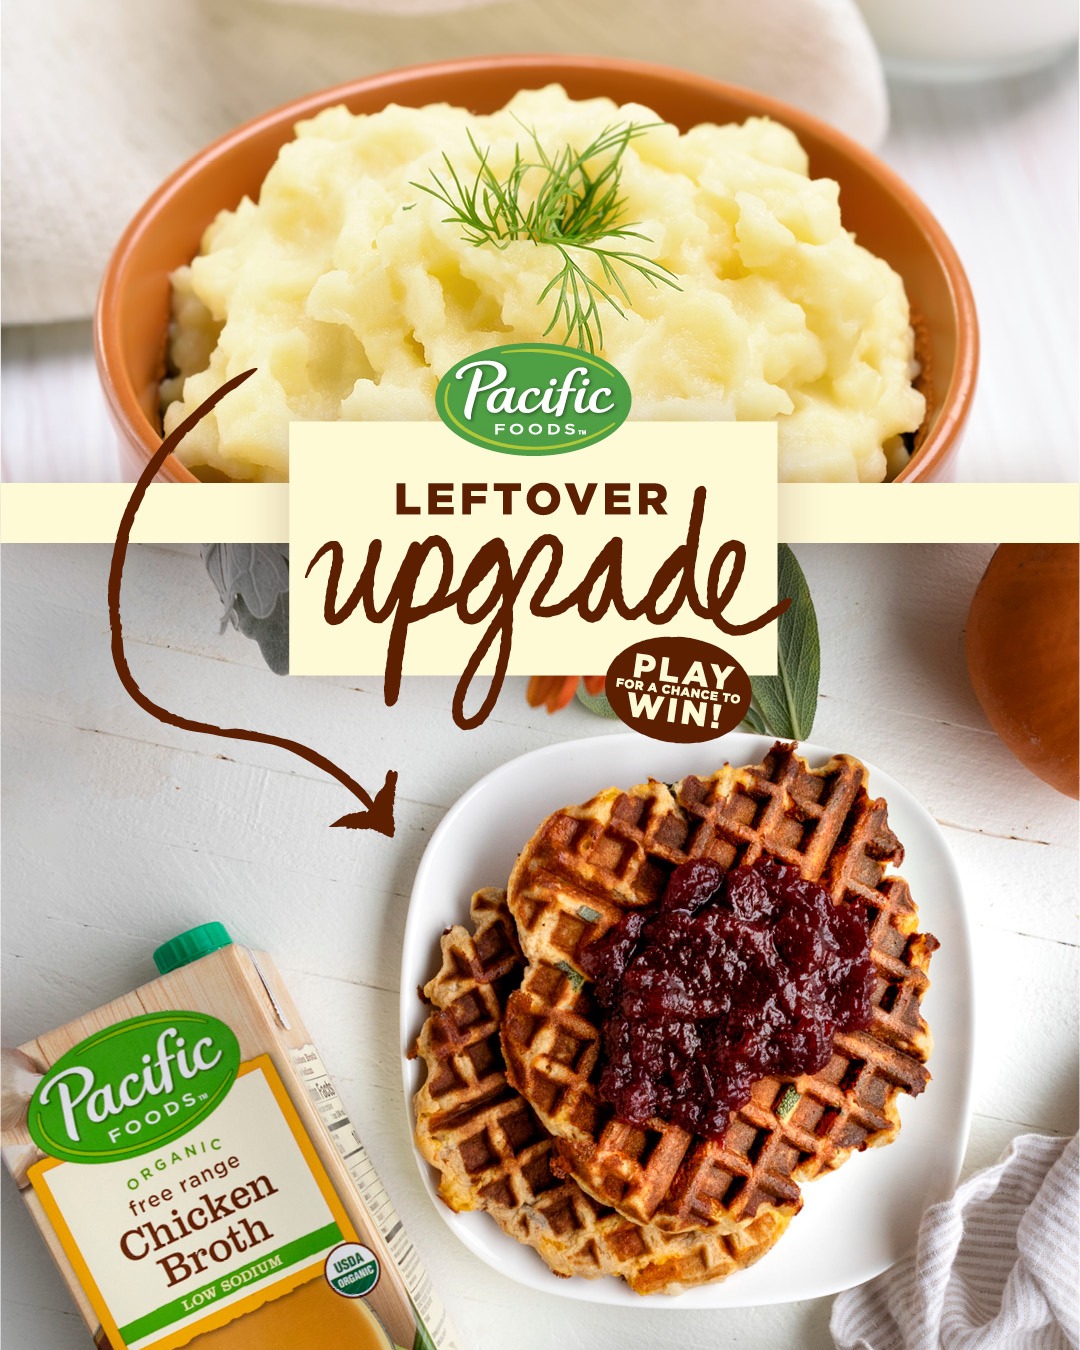 Pacific Foods’ Leftover Upgrade Interactive Video Consumer Sweepstakes